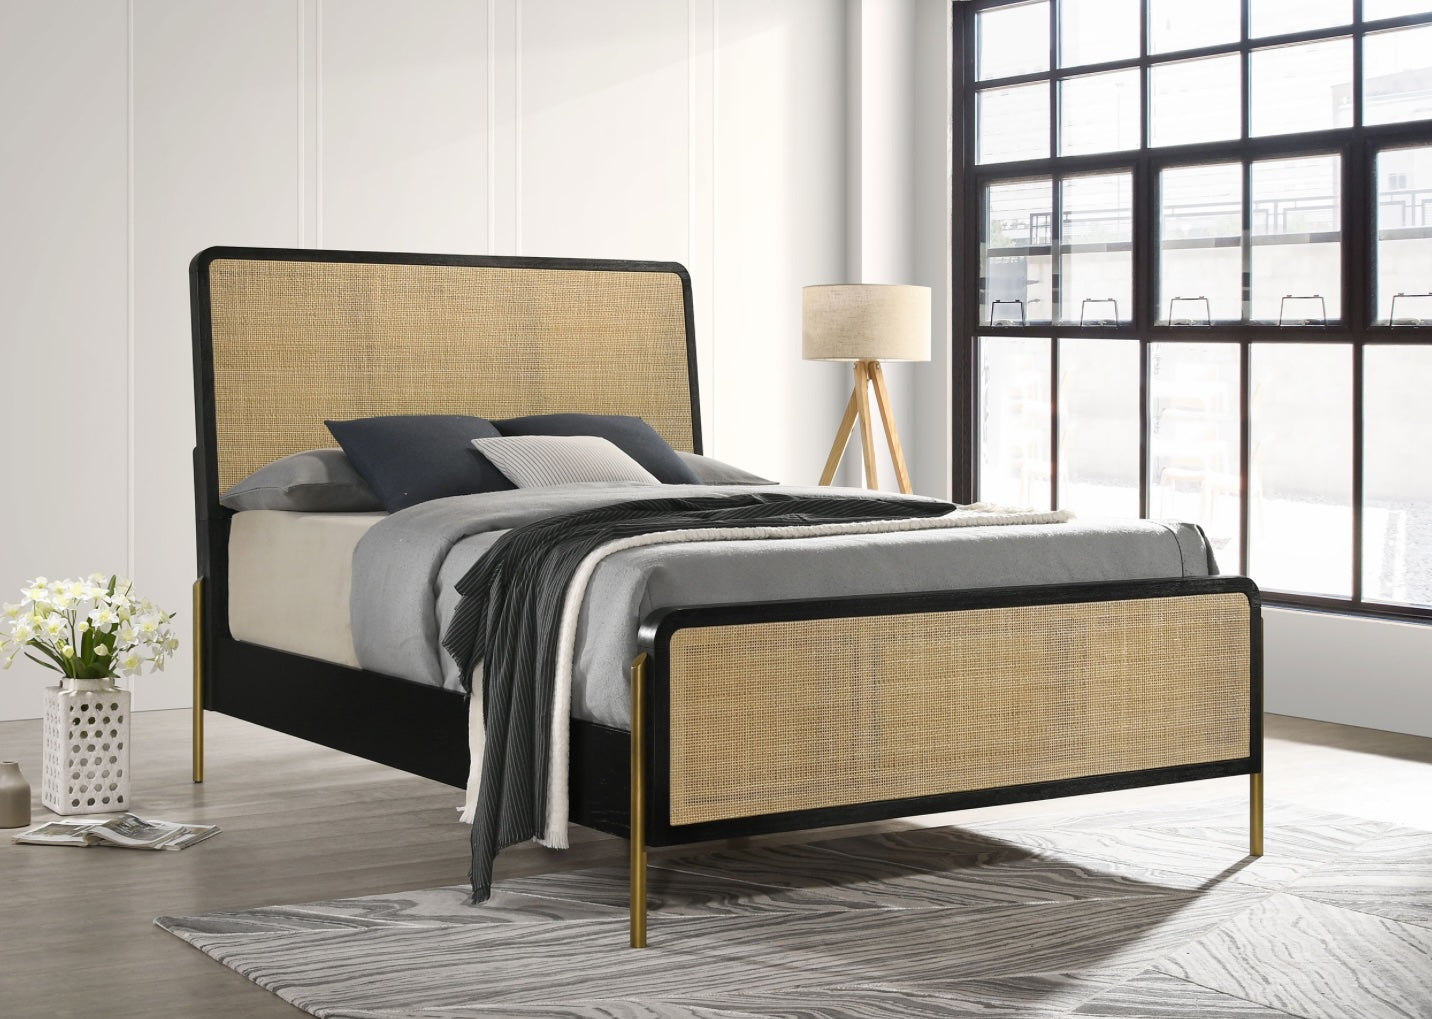 Arini Queen Bedroom Set With Woven Rattan Headboard Black And Natural